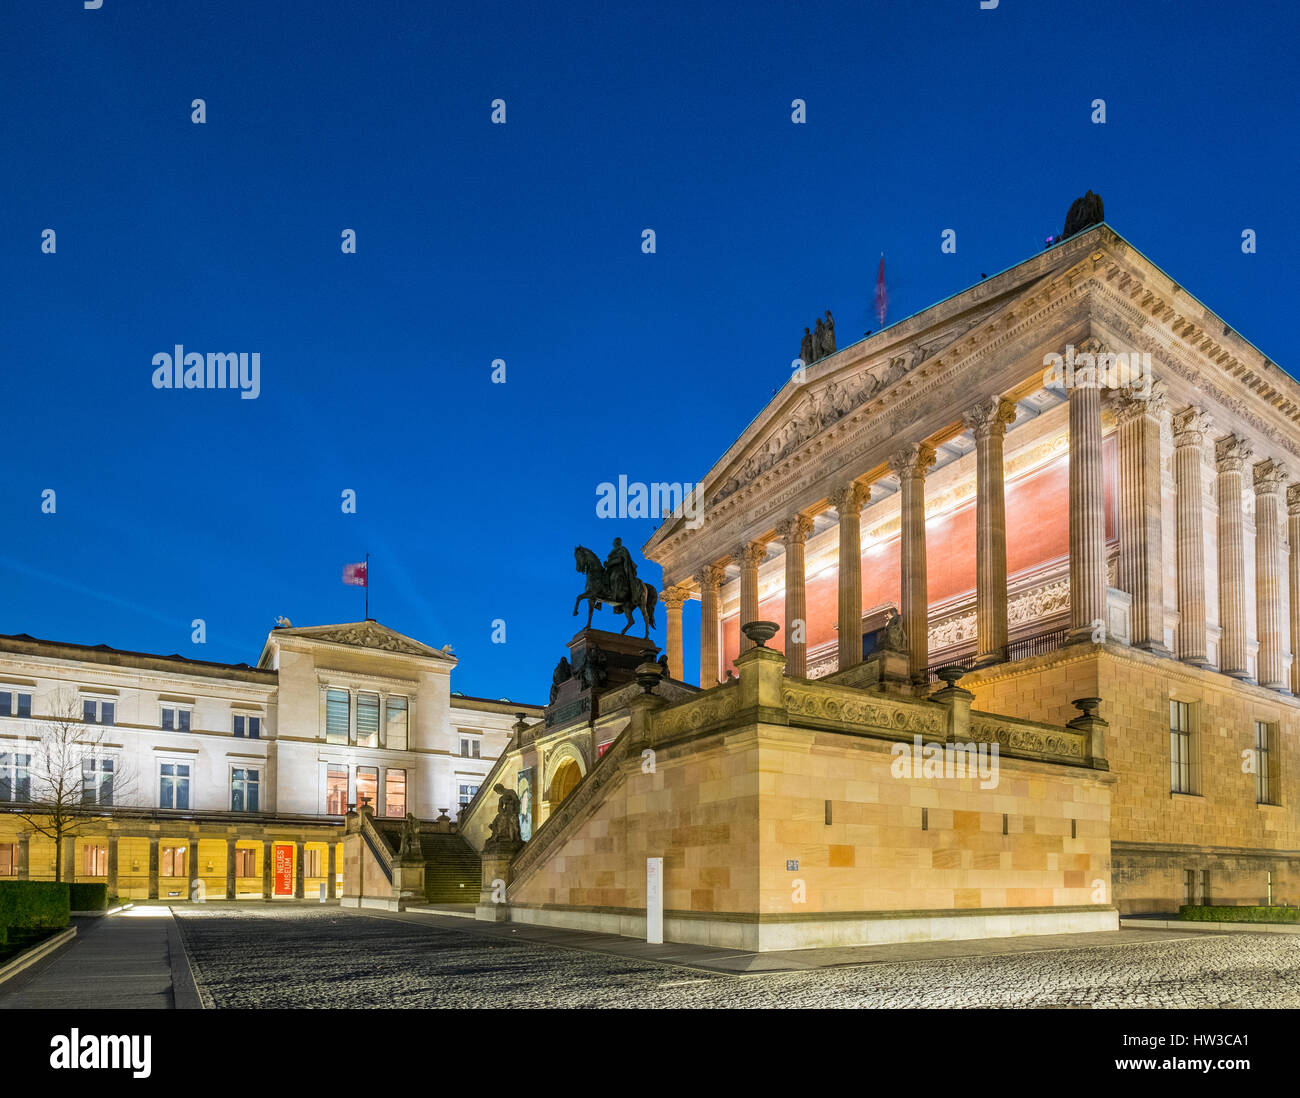 Night view of Neues Museum and Alte Nationalgalerie on Museumsinsel, Museum Island, UNESCO World Heritage Site, in Mitte, Berlin, Germany. Stock Photo